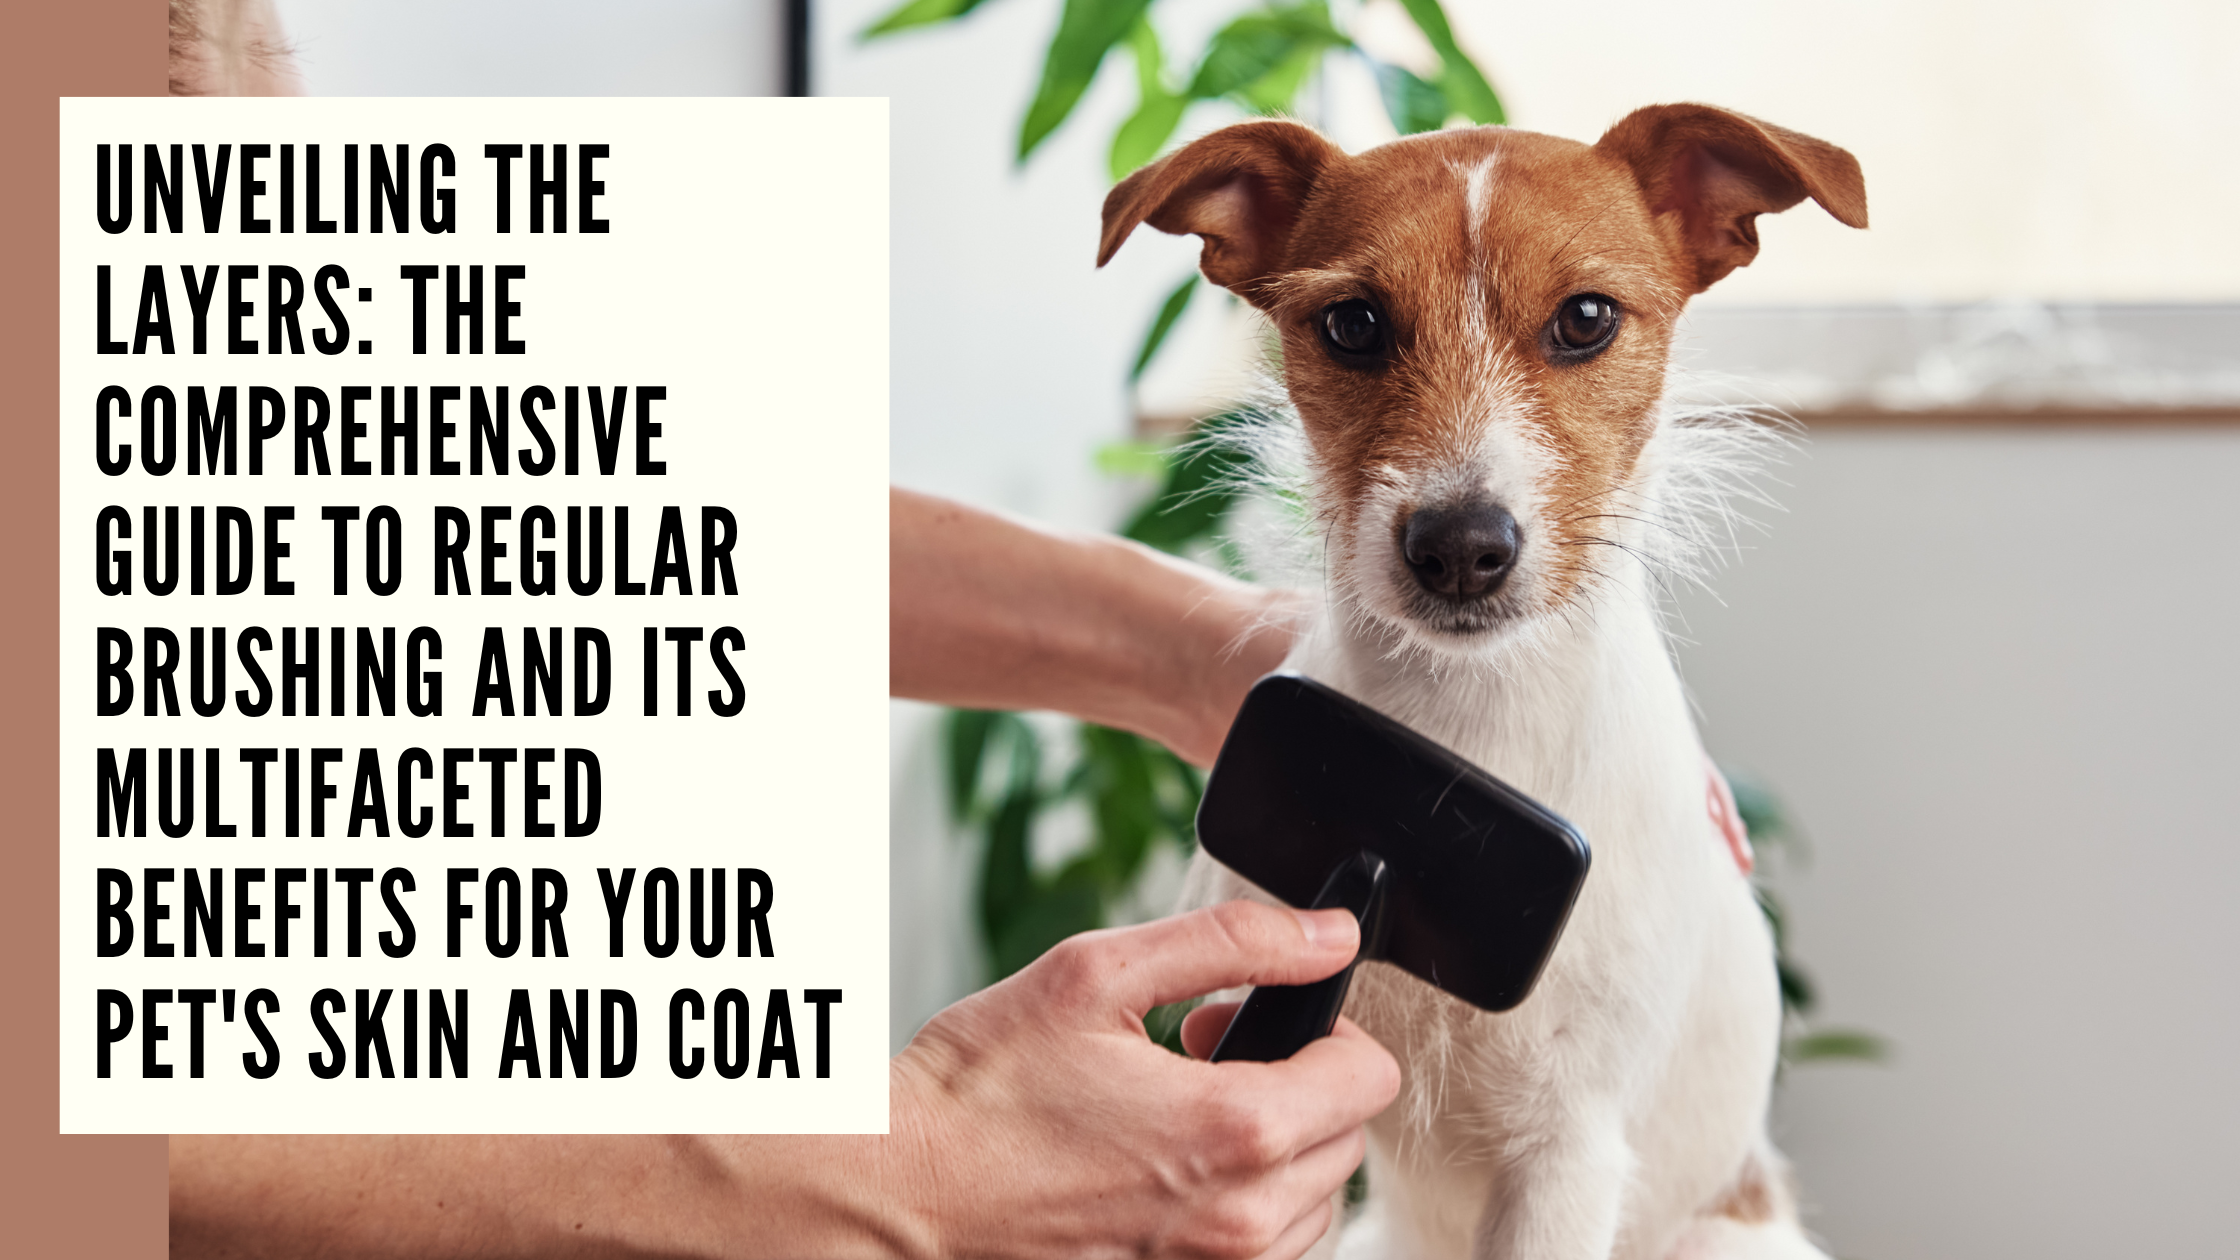 Unveiling the Layers The Comprehensive Guide to Regular Brushing and Its Multifaceted Benefits for Your Pet's Skin and Coat